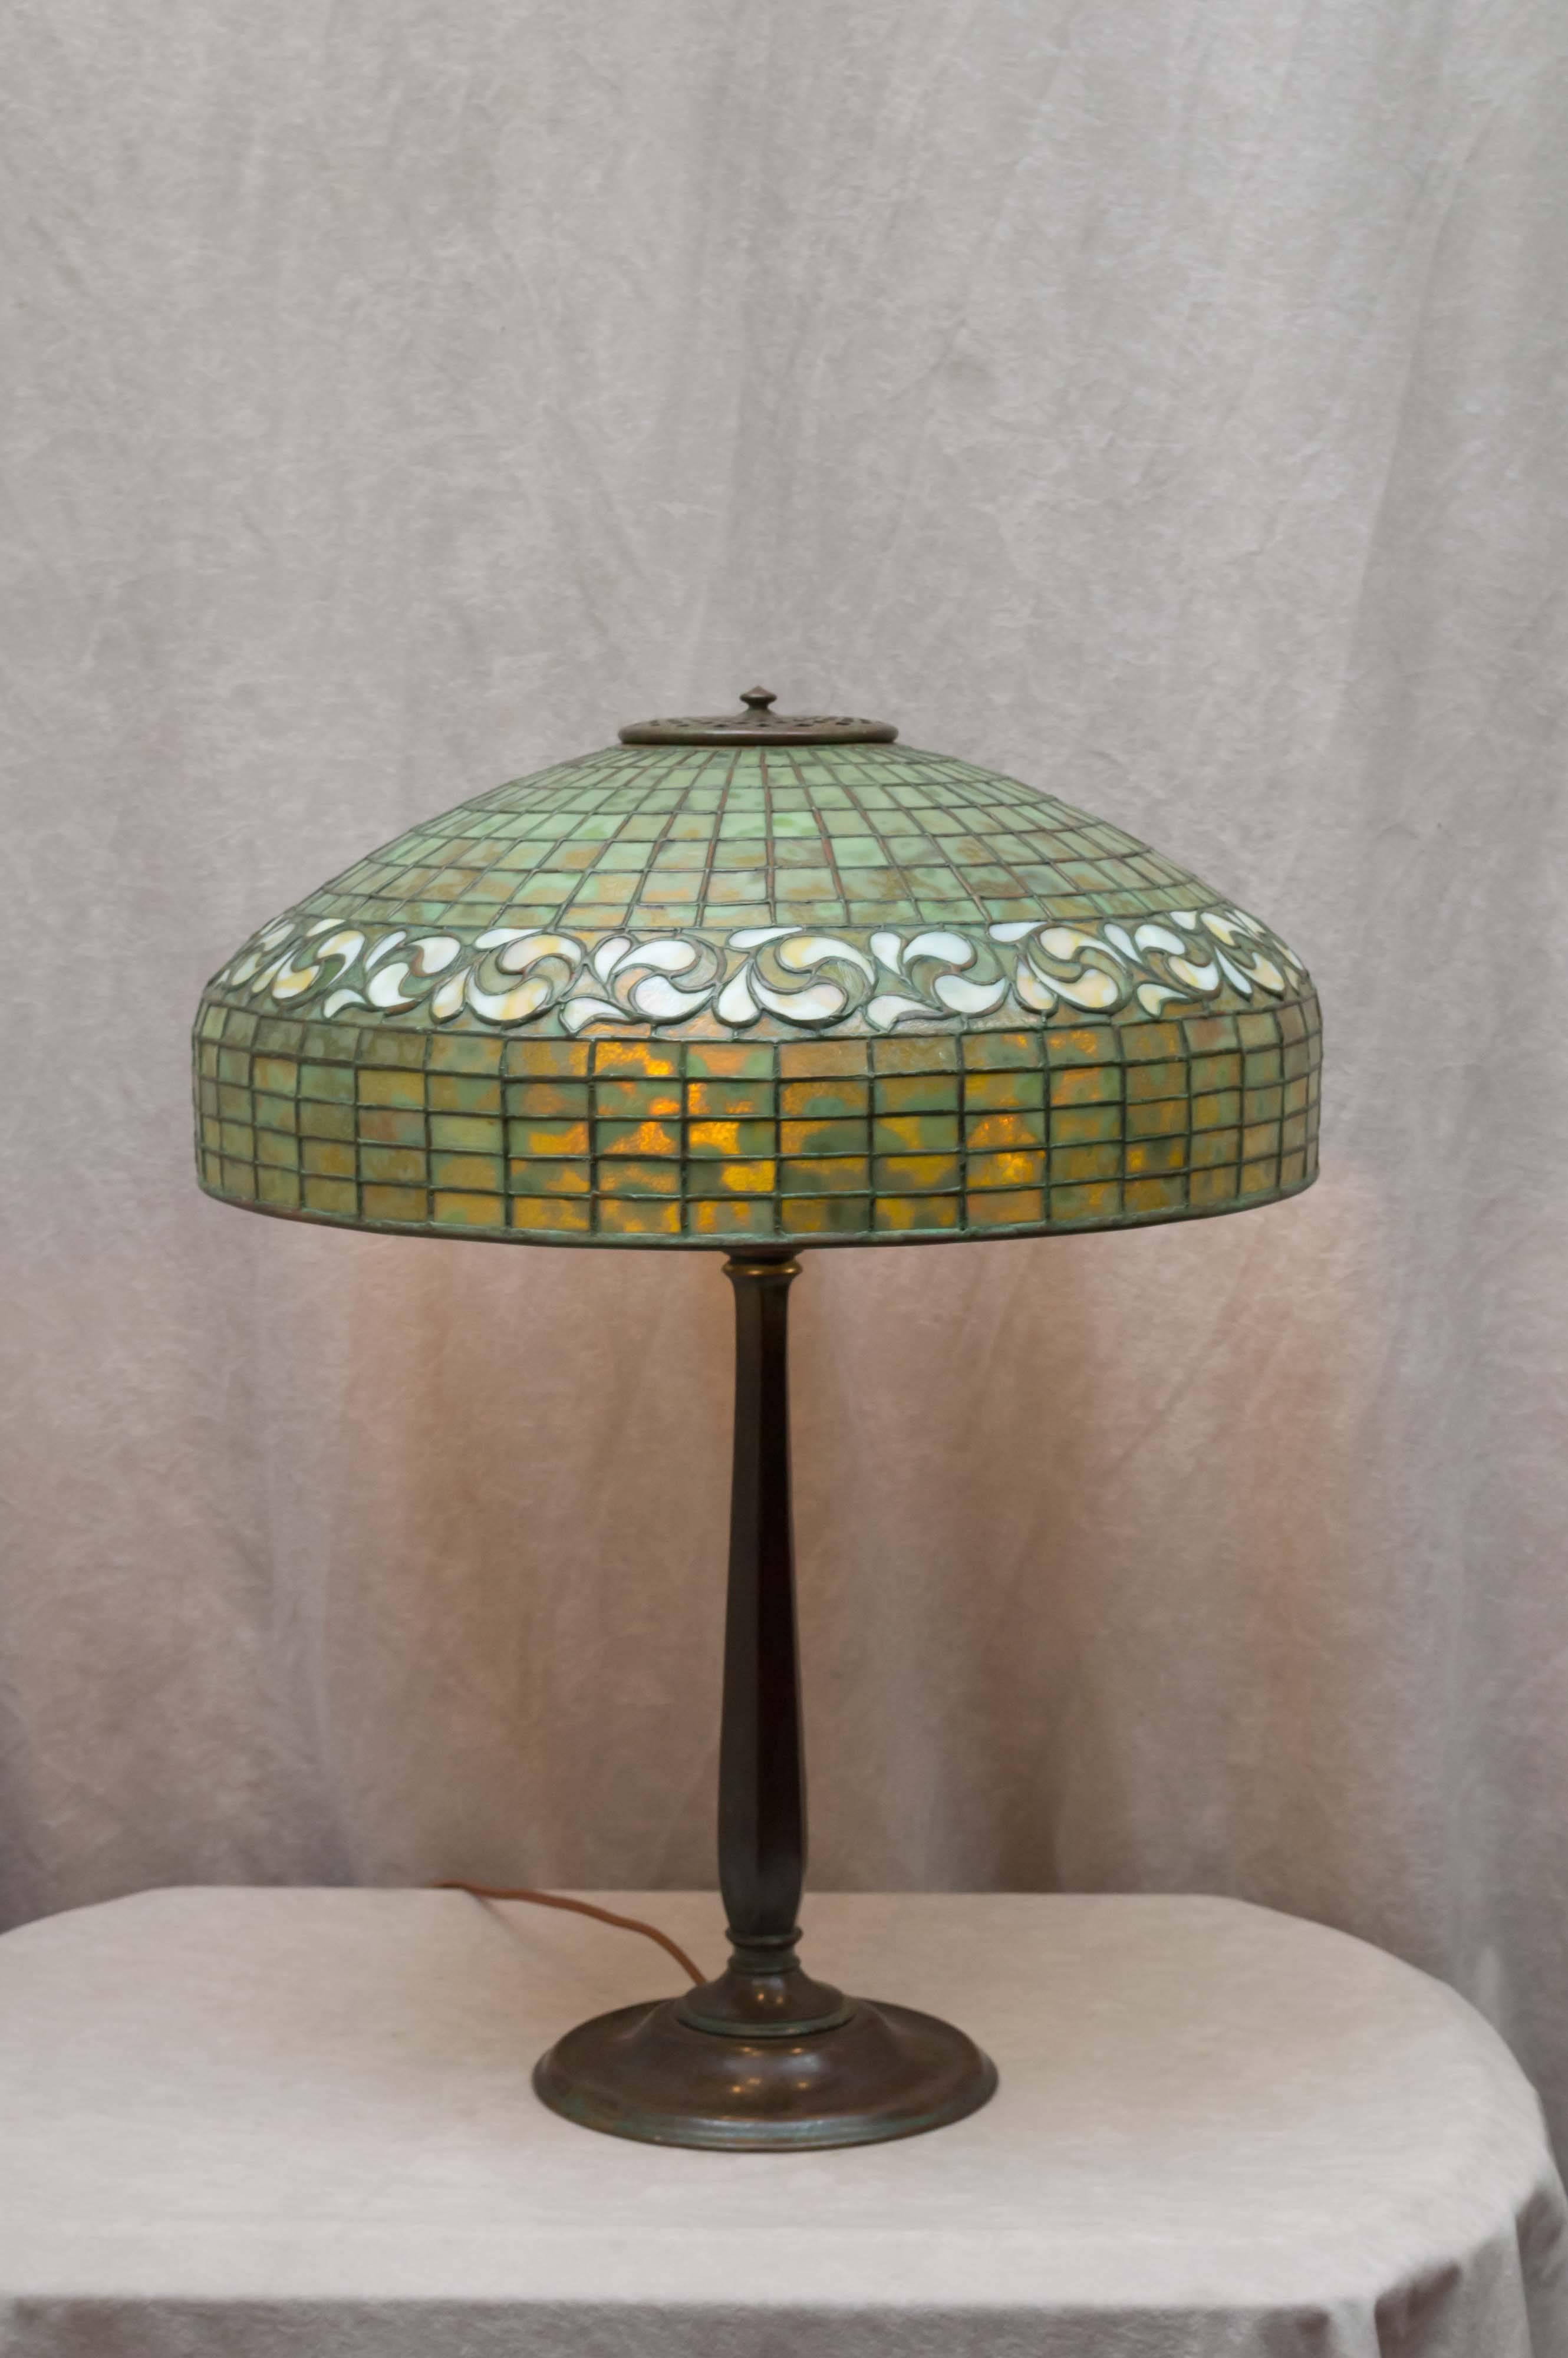 This all signed Tiffany Studios lamp has some of the most mottled glass you can find. Tiffany enjoyed showing off some of his best glass on his simpler patterned lamps. A stunning model, and on a simple, appropriate base. A great package for someone